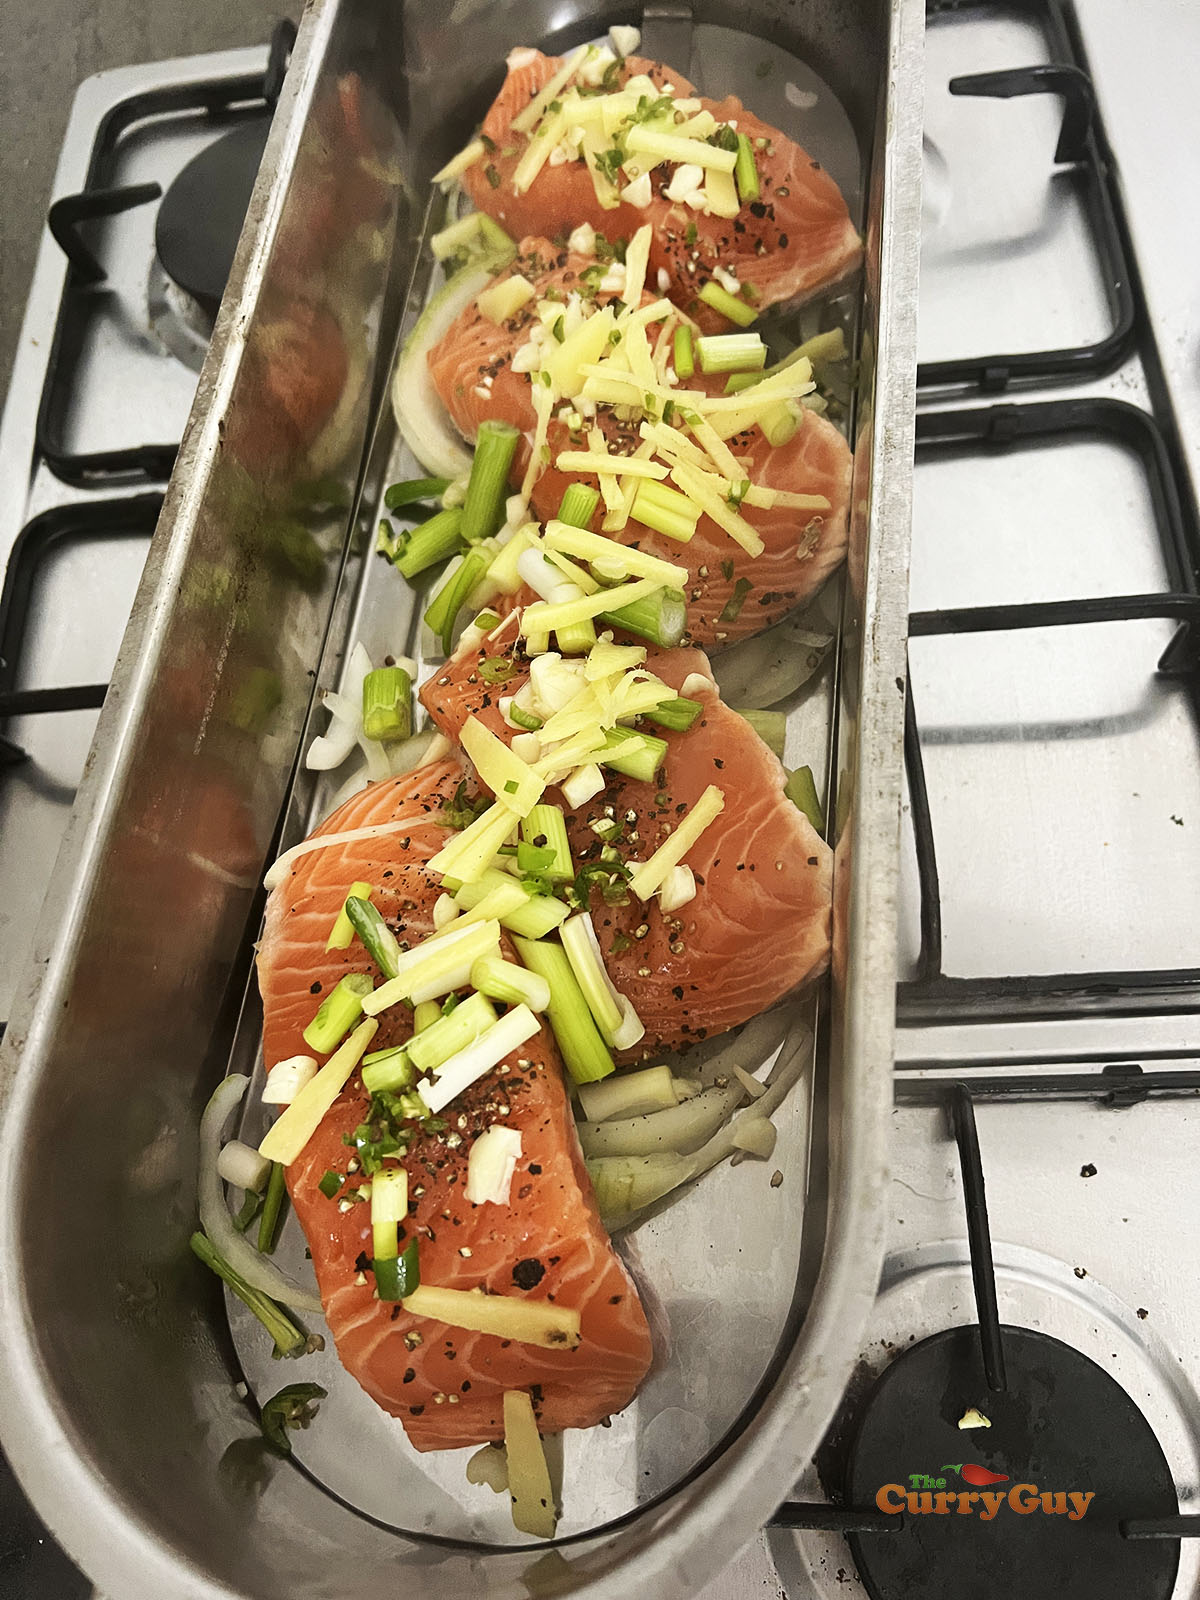 Salmon topped with ginger garlic and chillies in a steamer